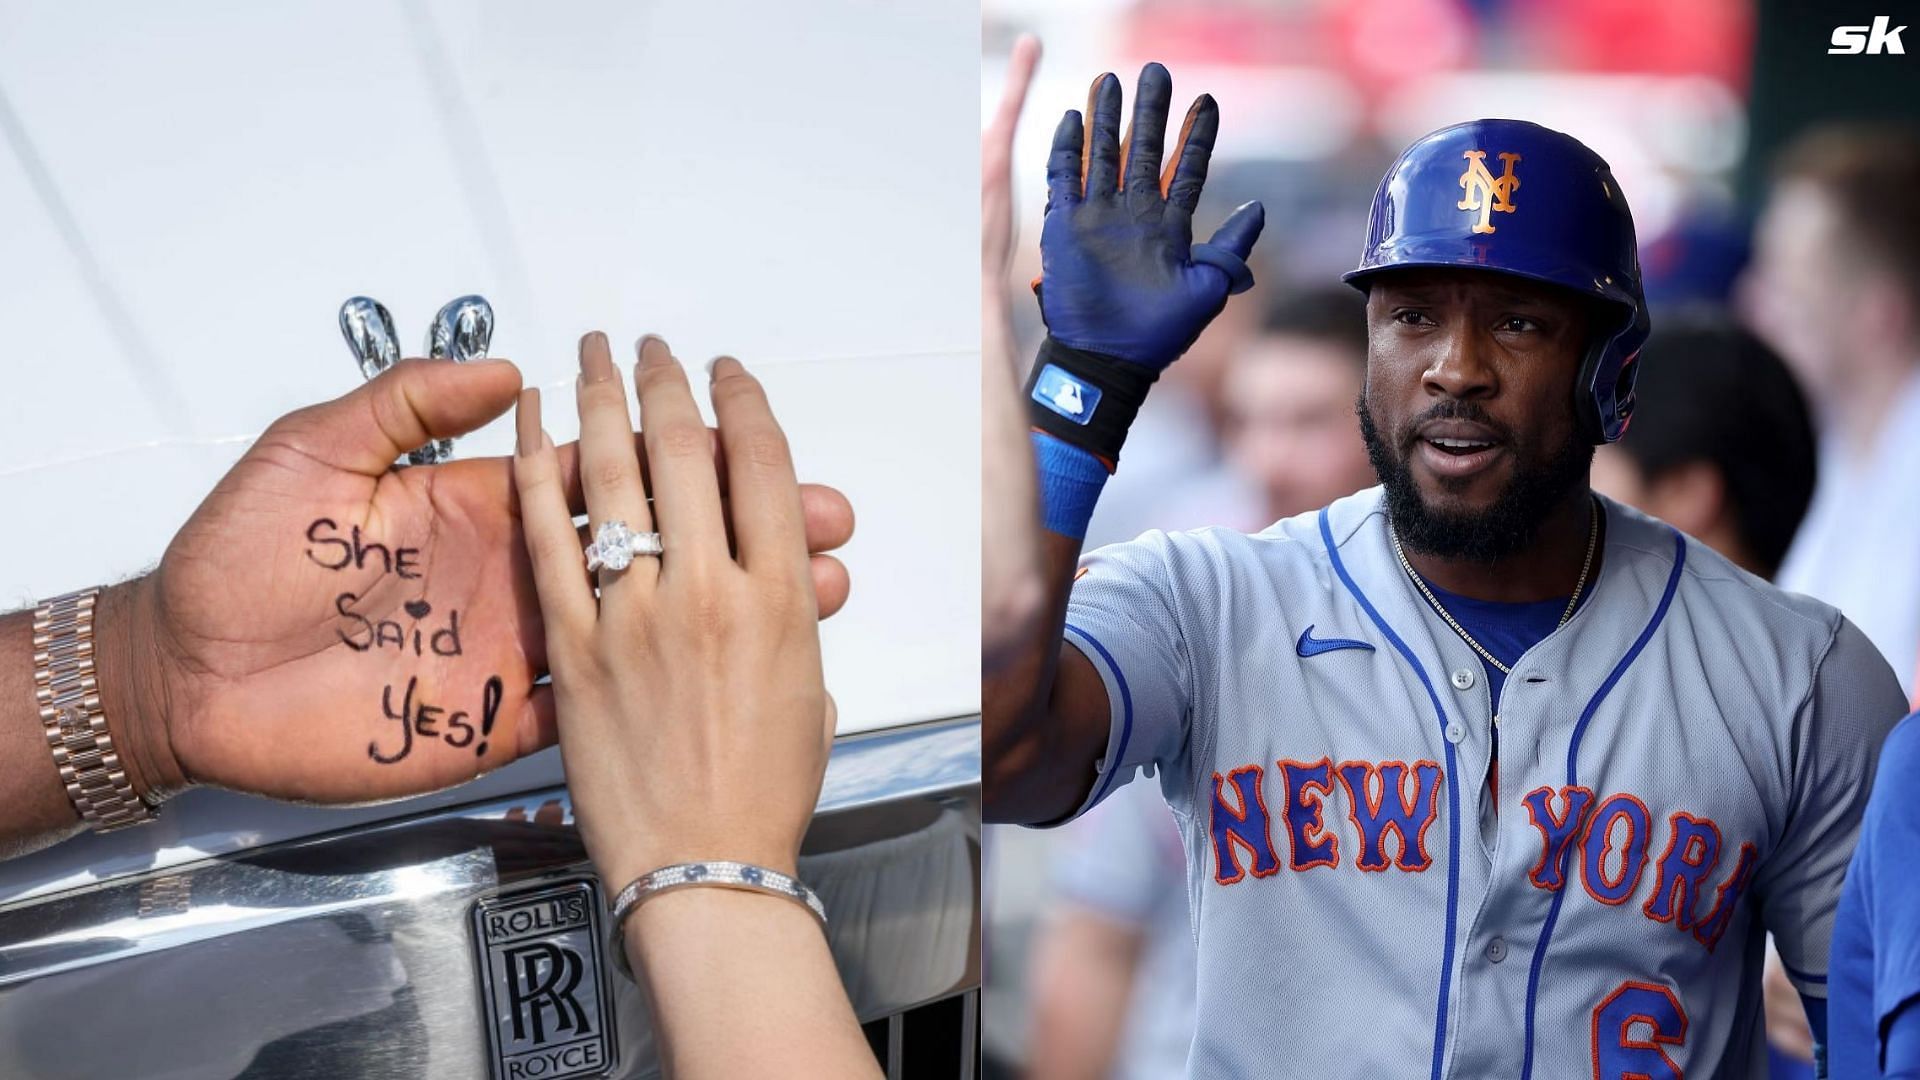 Former Pittsburgh Pirate Starling Marte Announces His Wife, Noelia